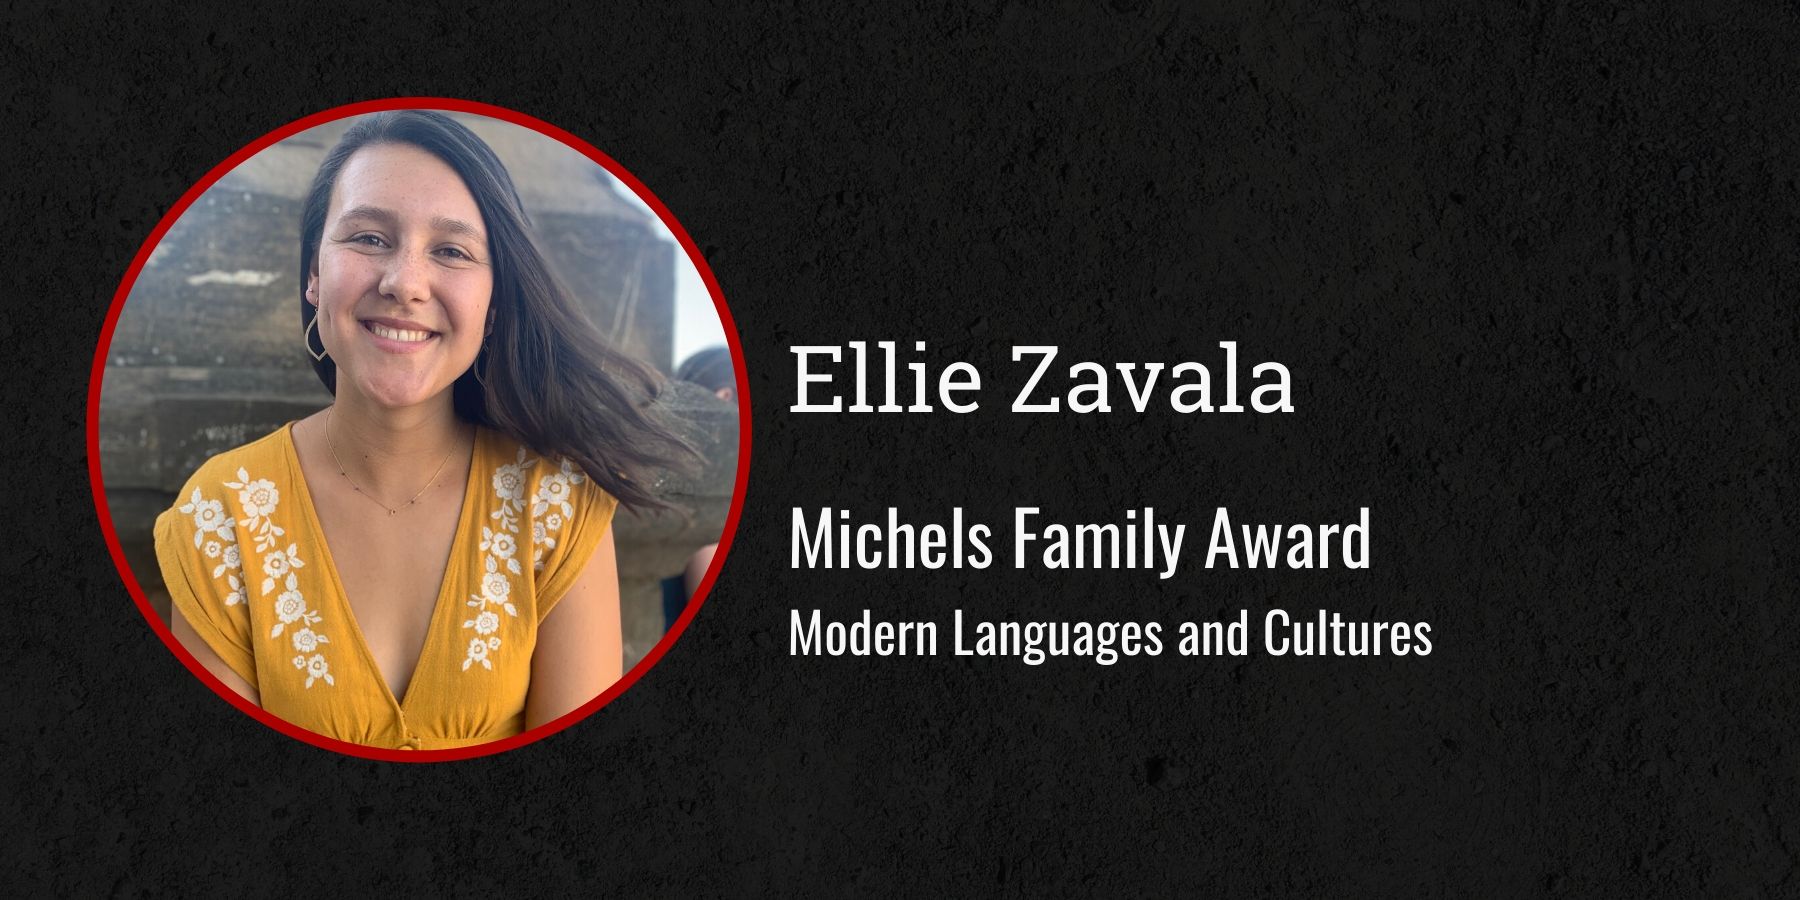 Photo of Ellie Zavala and text Michels Family Award, Modern Languages and Cultures